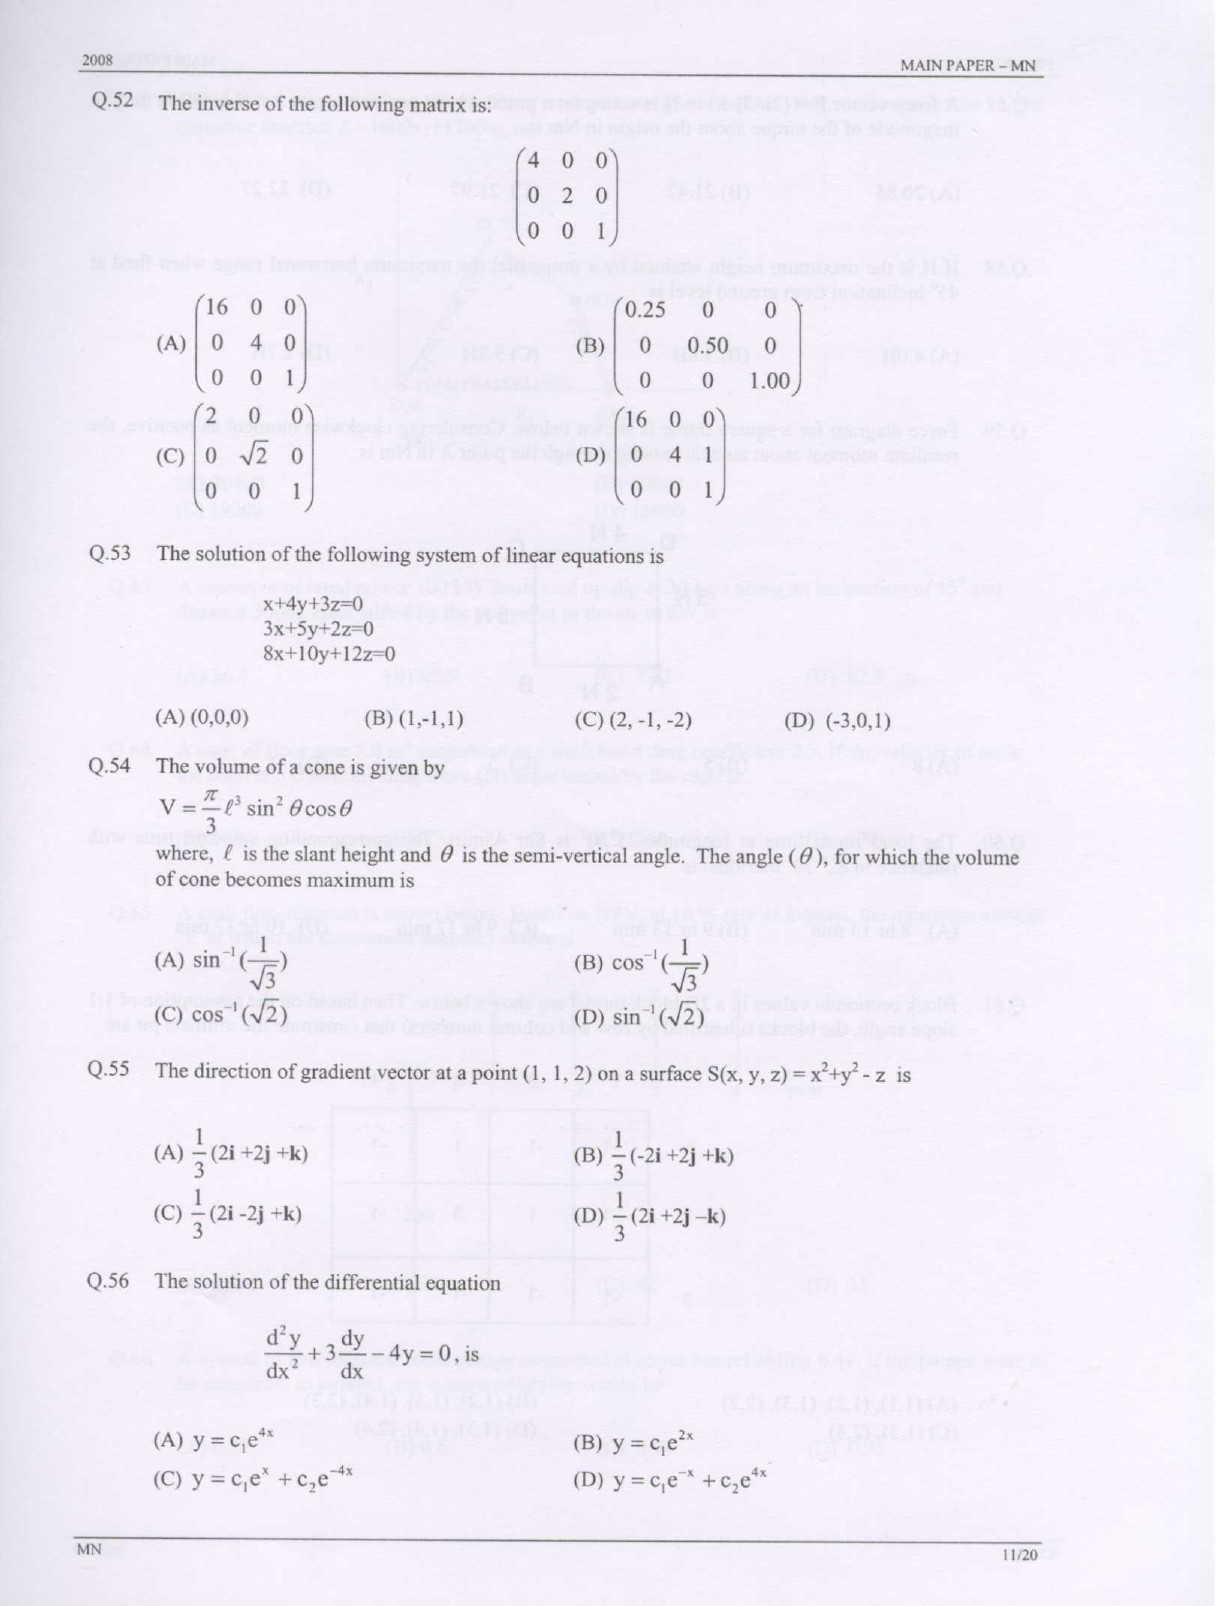 GATE Exam Question Paper 2008 Mining Engineering 11